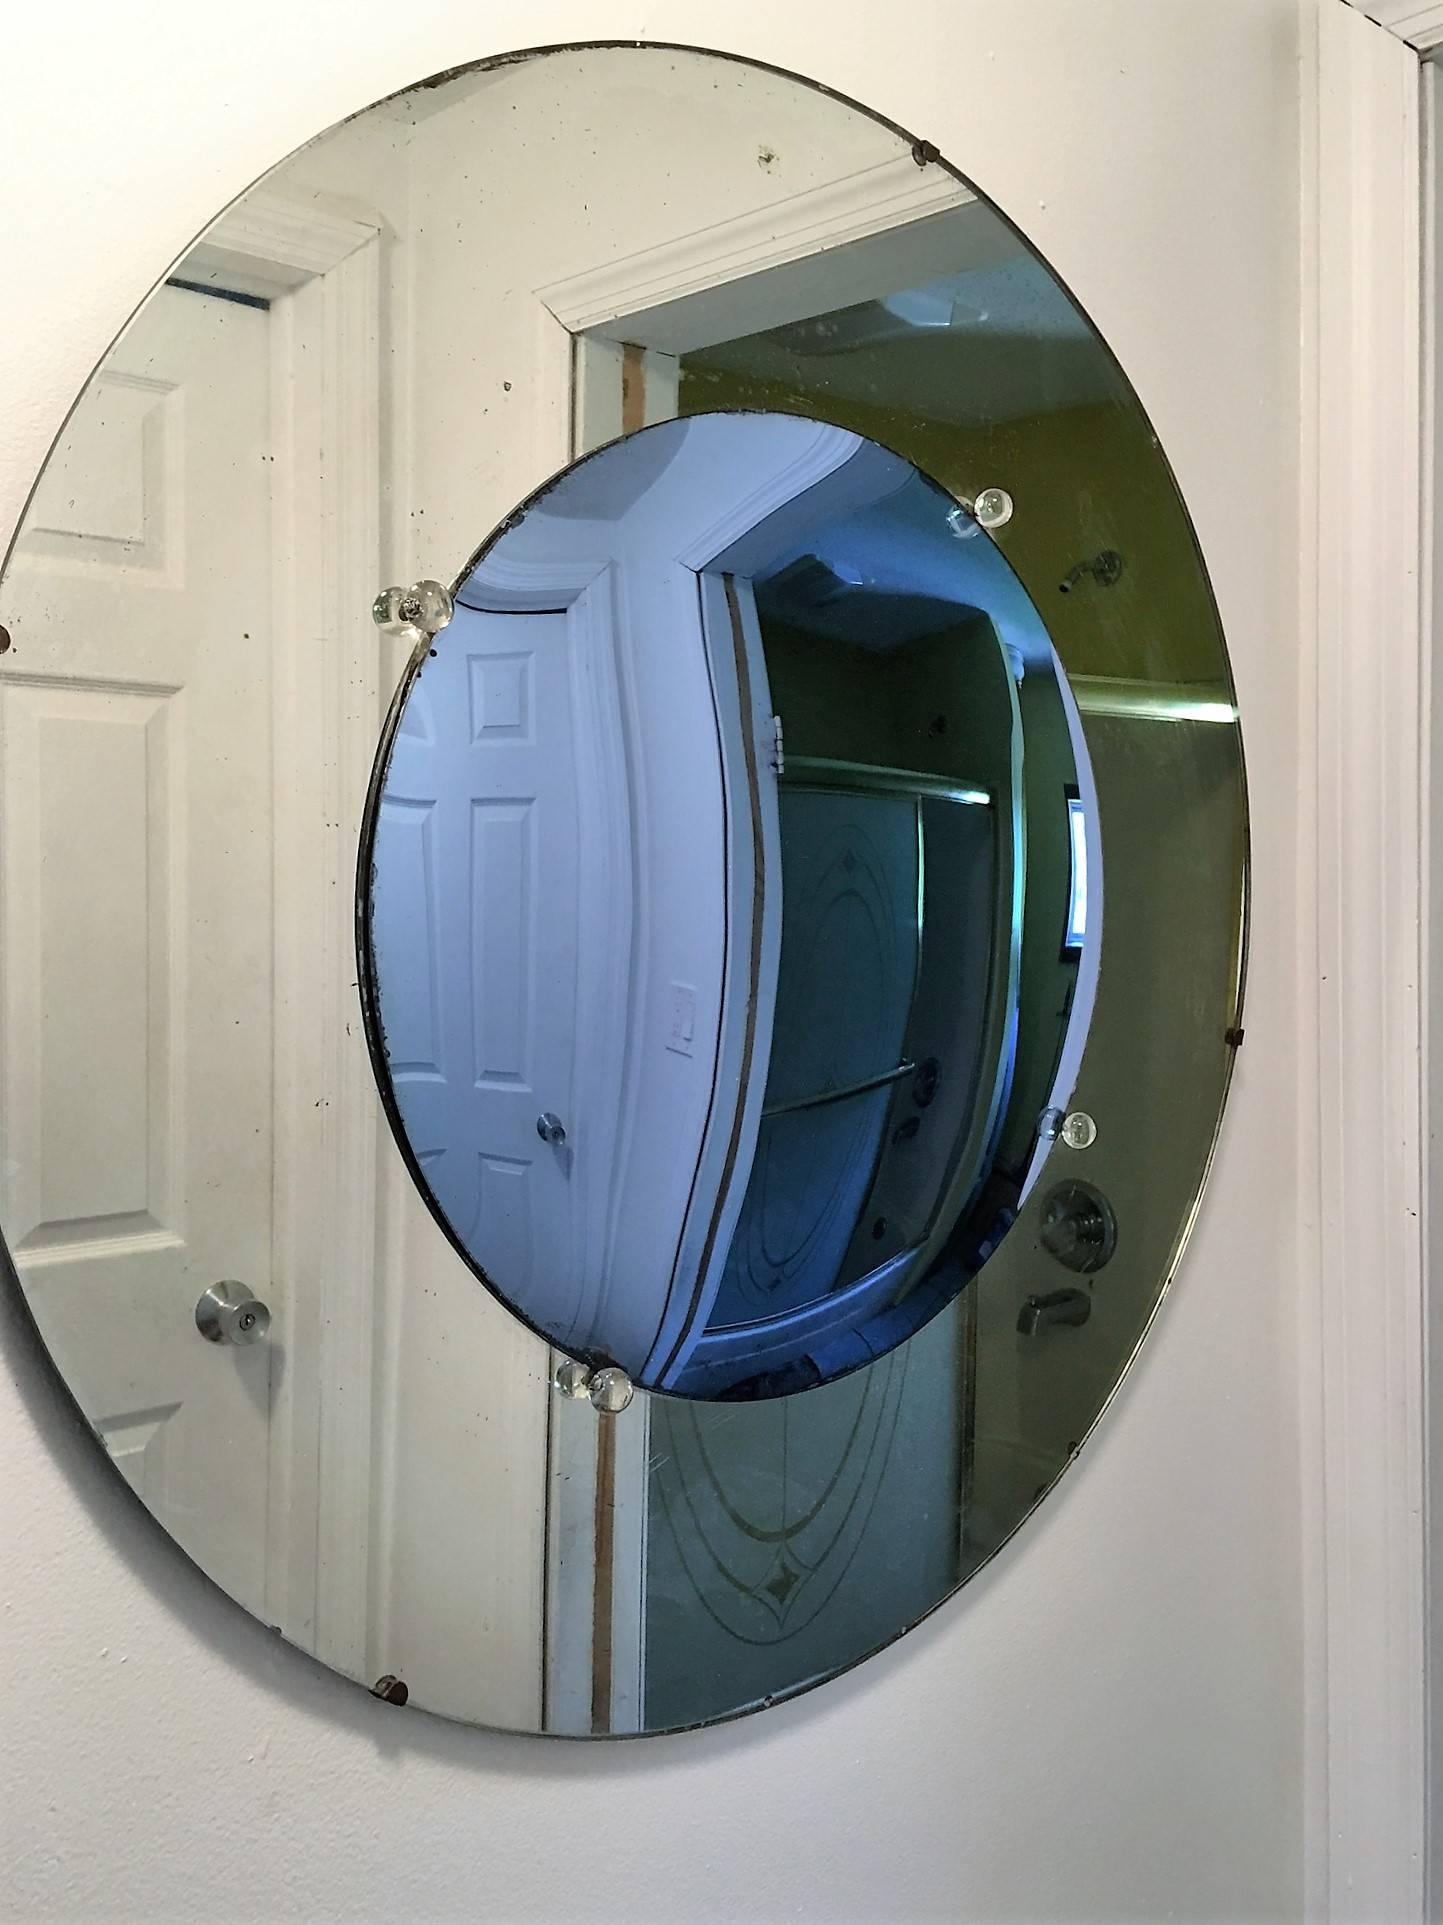 Great convex form Art Deco mirror in the hues of cobalt blue and clear. The blue center is framed by four decorative glass balls, a period of Streamline design, 1930s. Mirror looking futuristic yet past. Mounted on wood, all original and sturdy,